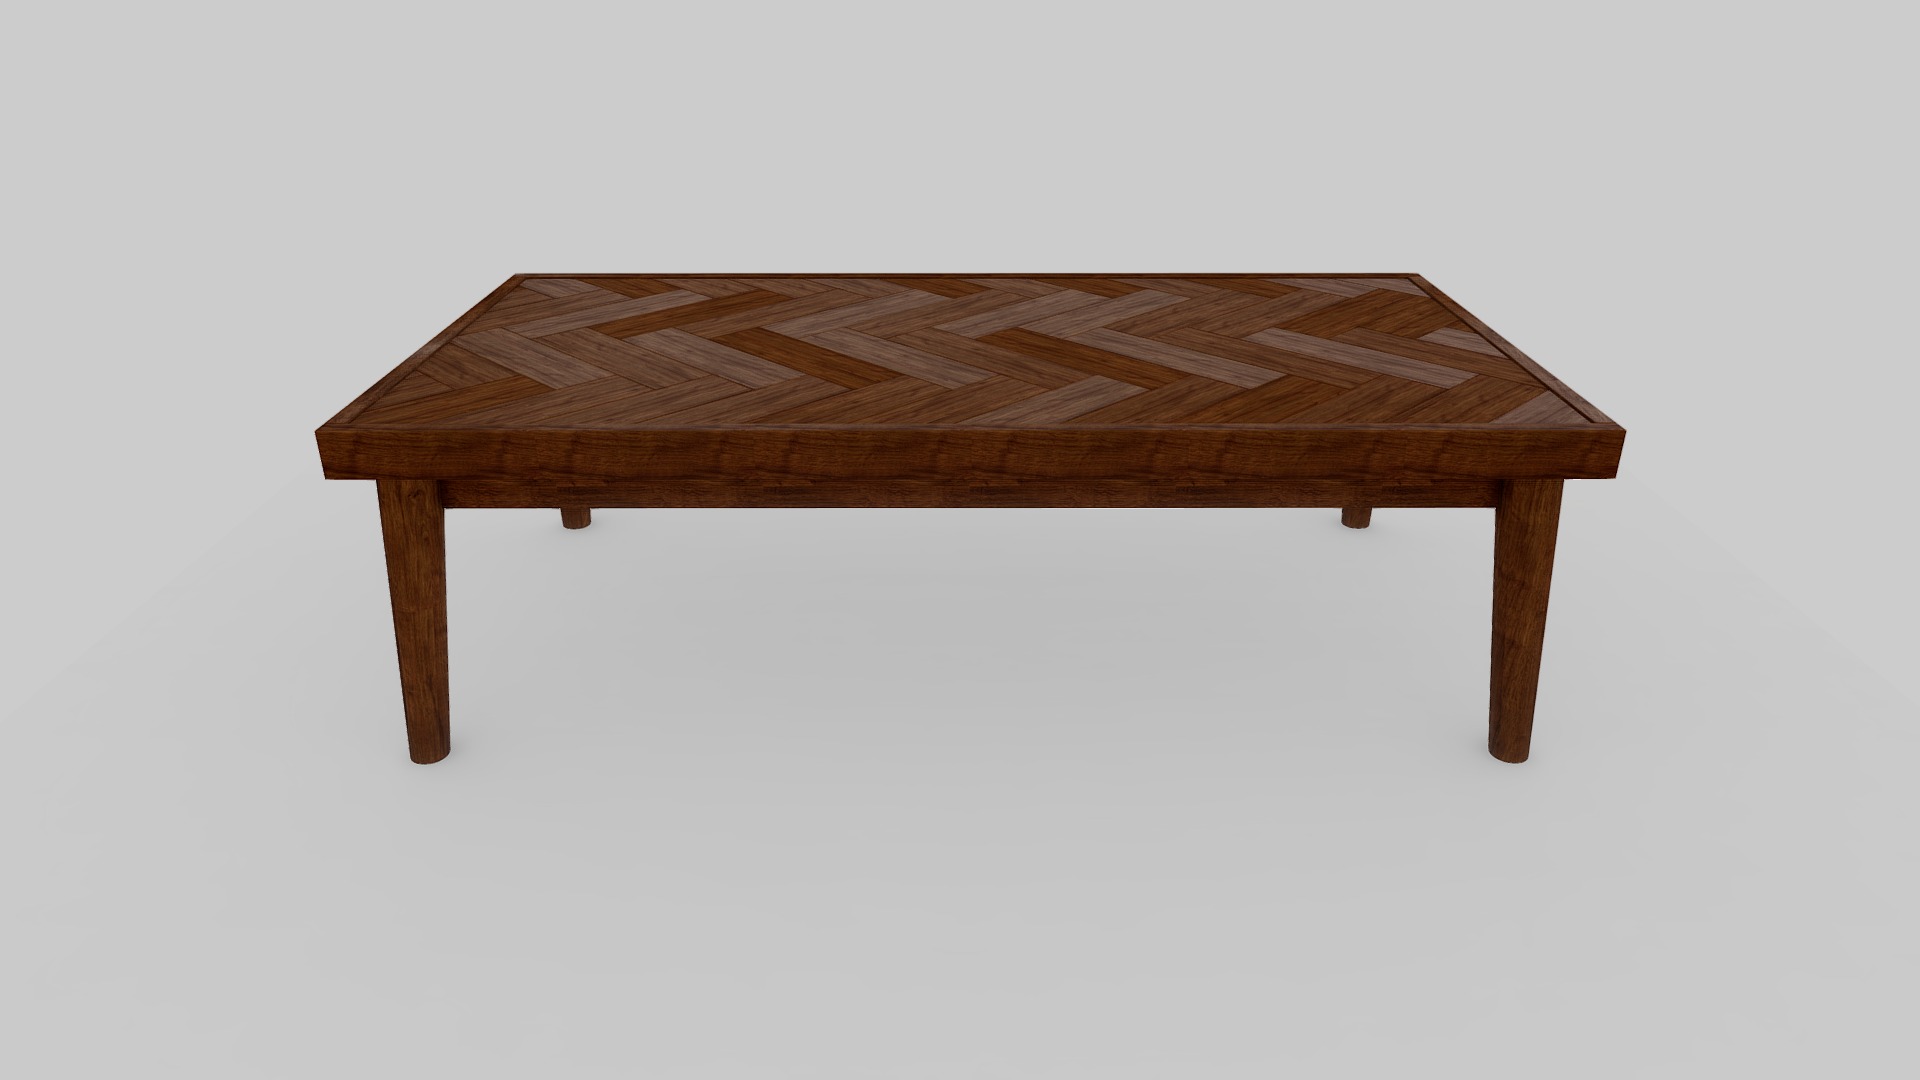 3D model Ashton Wooden Bench - This is a 3D model of the Ashton Wooden Bench. The 3D model is about a wooden table with a white background.